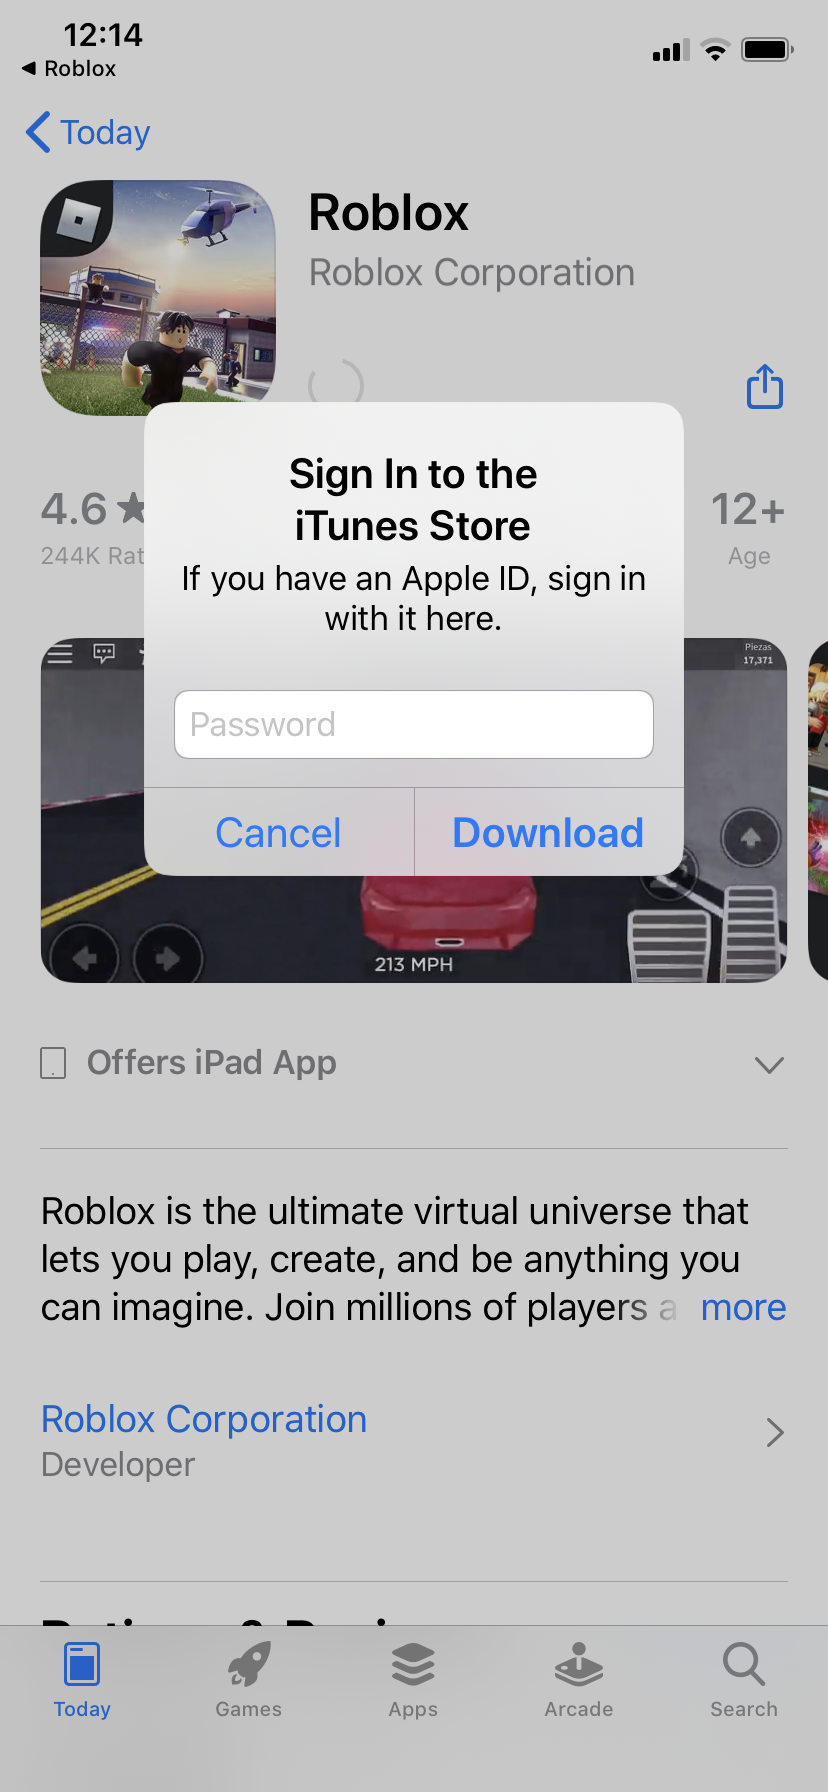 Update If An App Apple Id Apple Community - roblox image id for apple